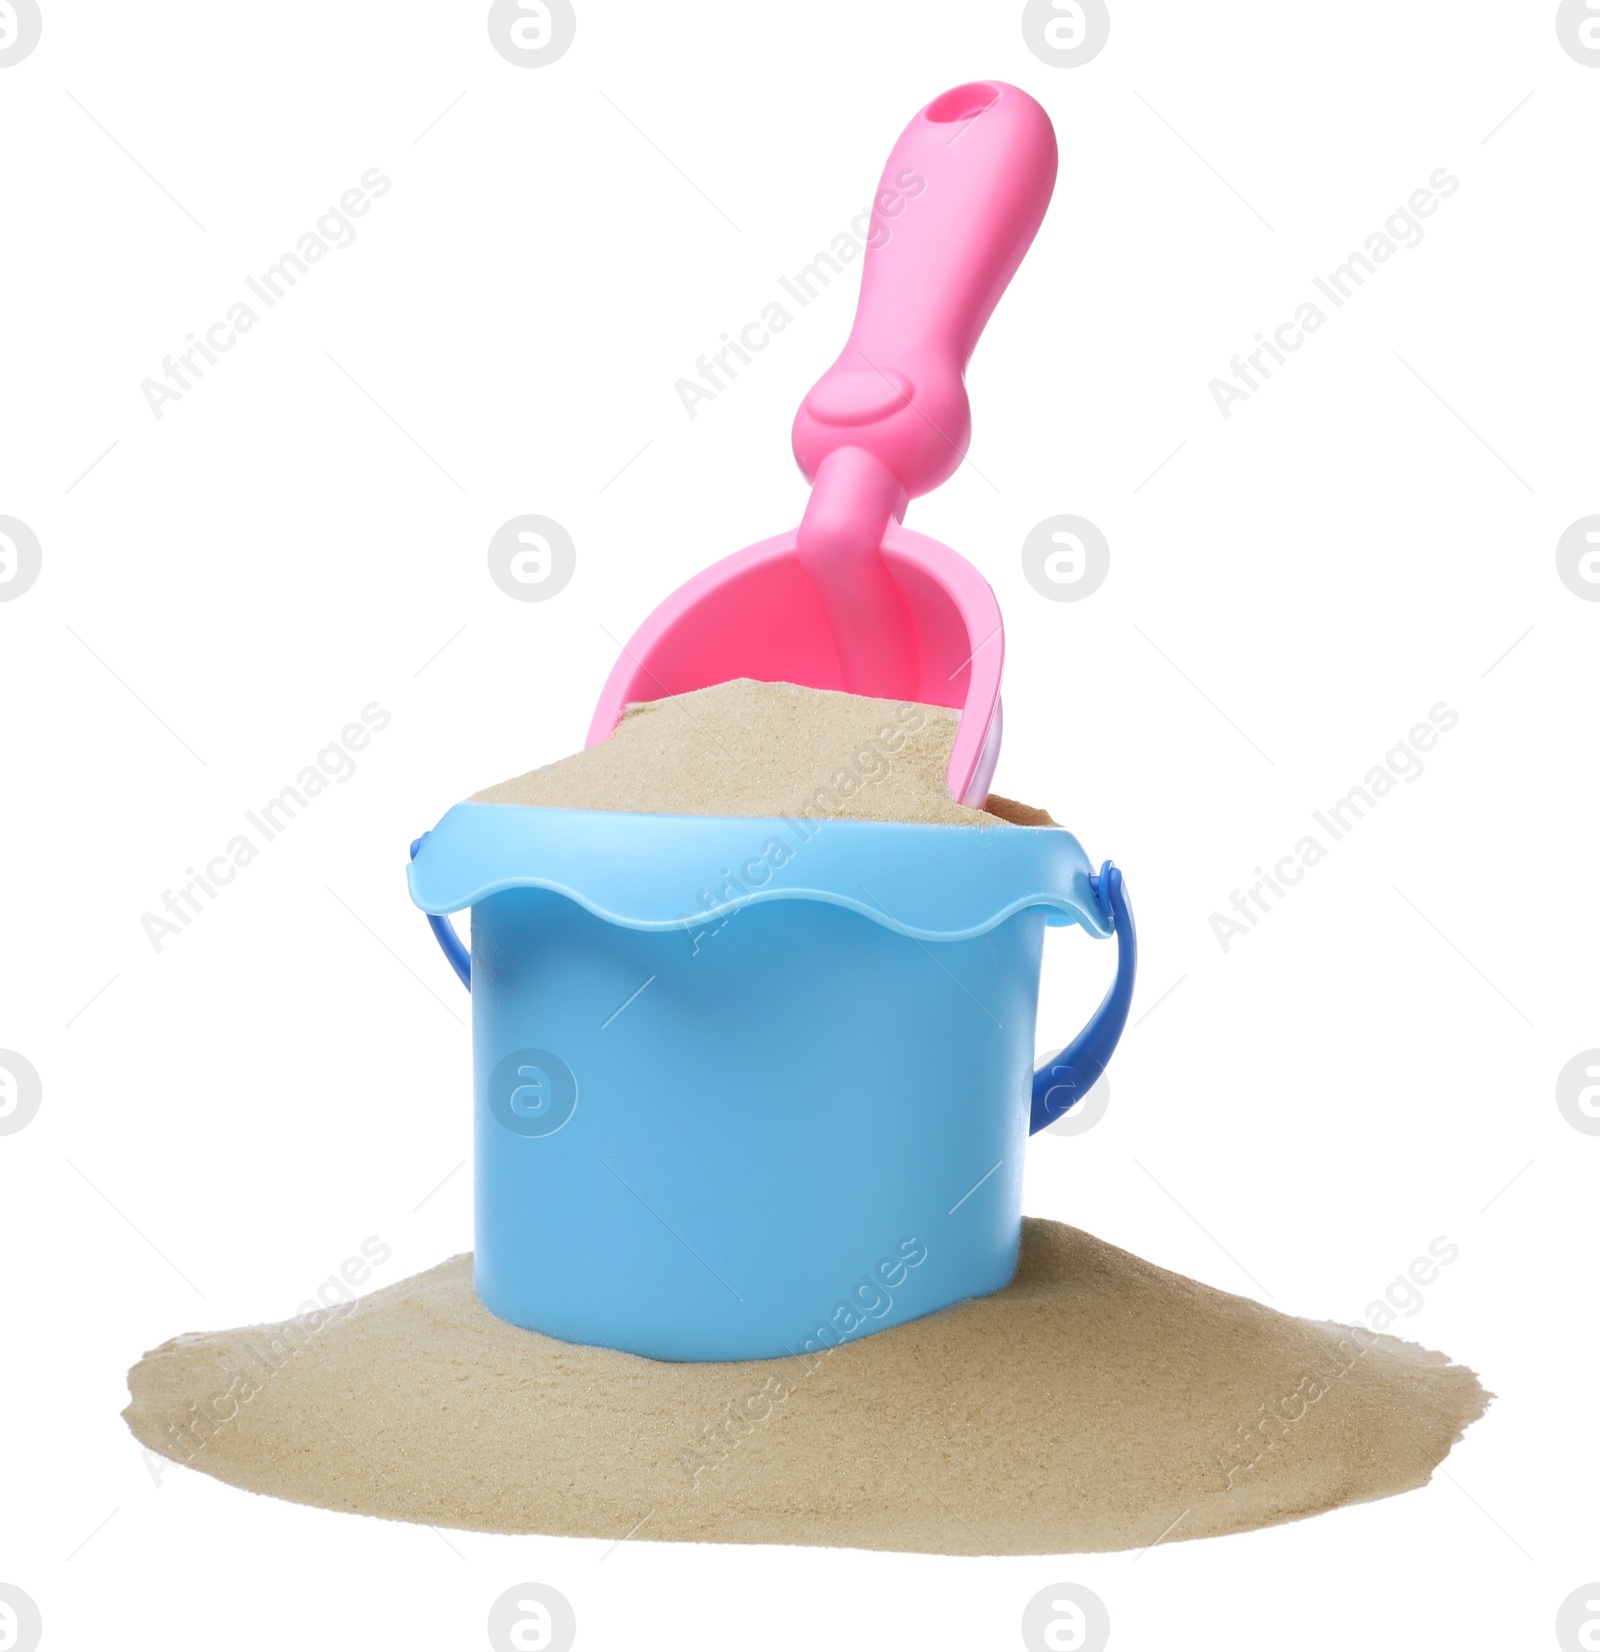 Photo of Plastic toy bucket with pink shovel and sand on white background